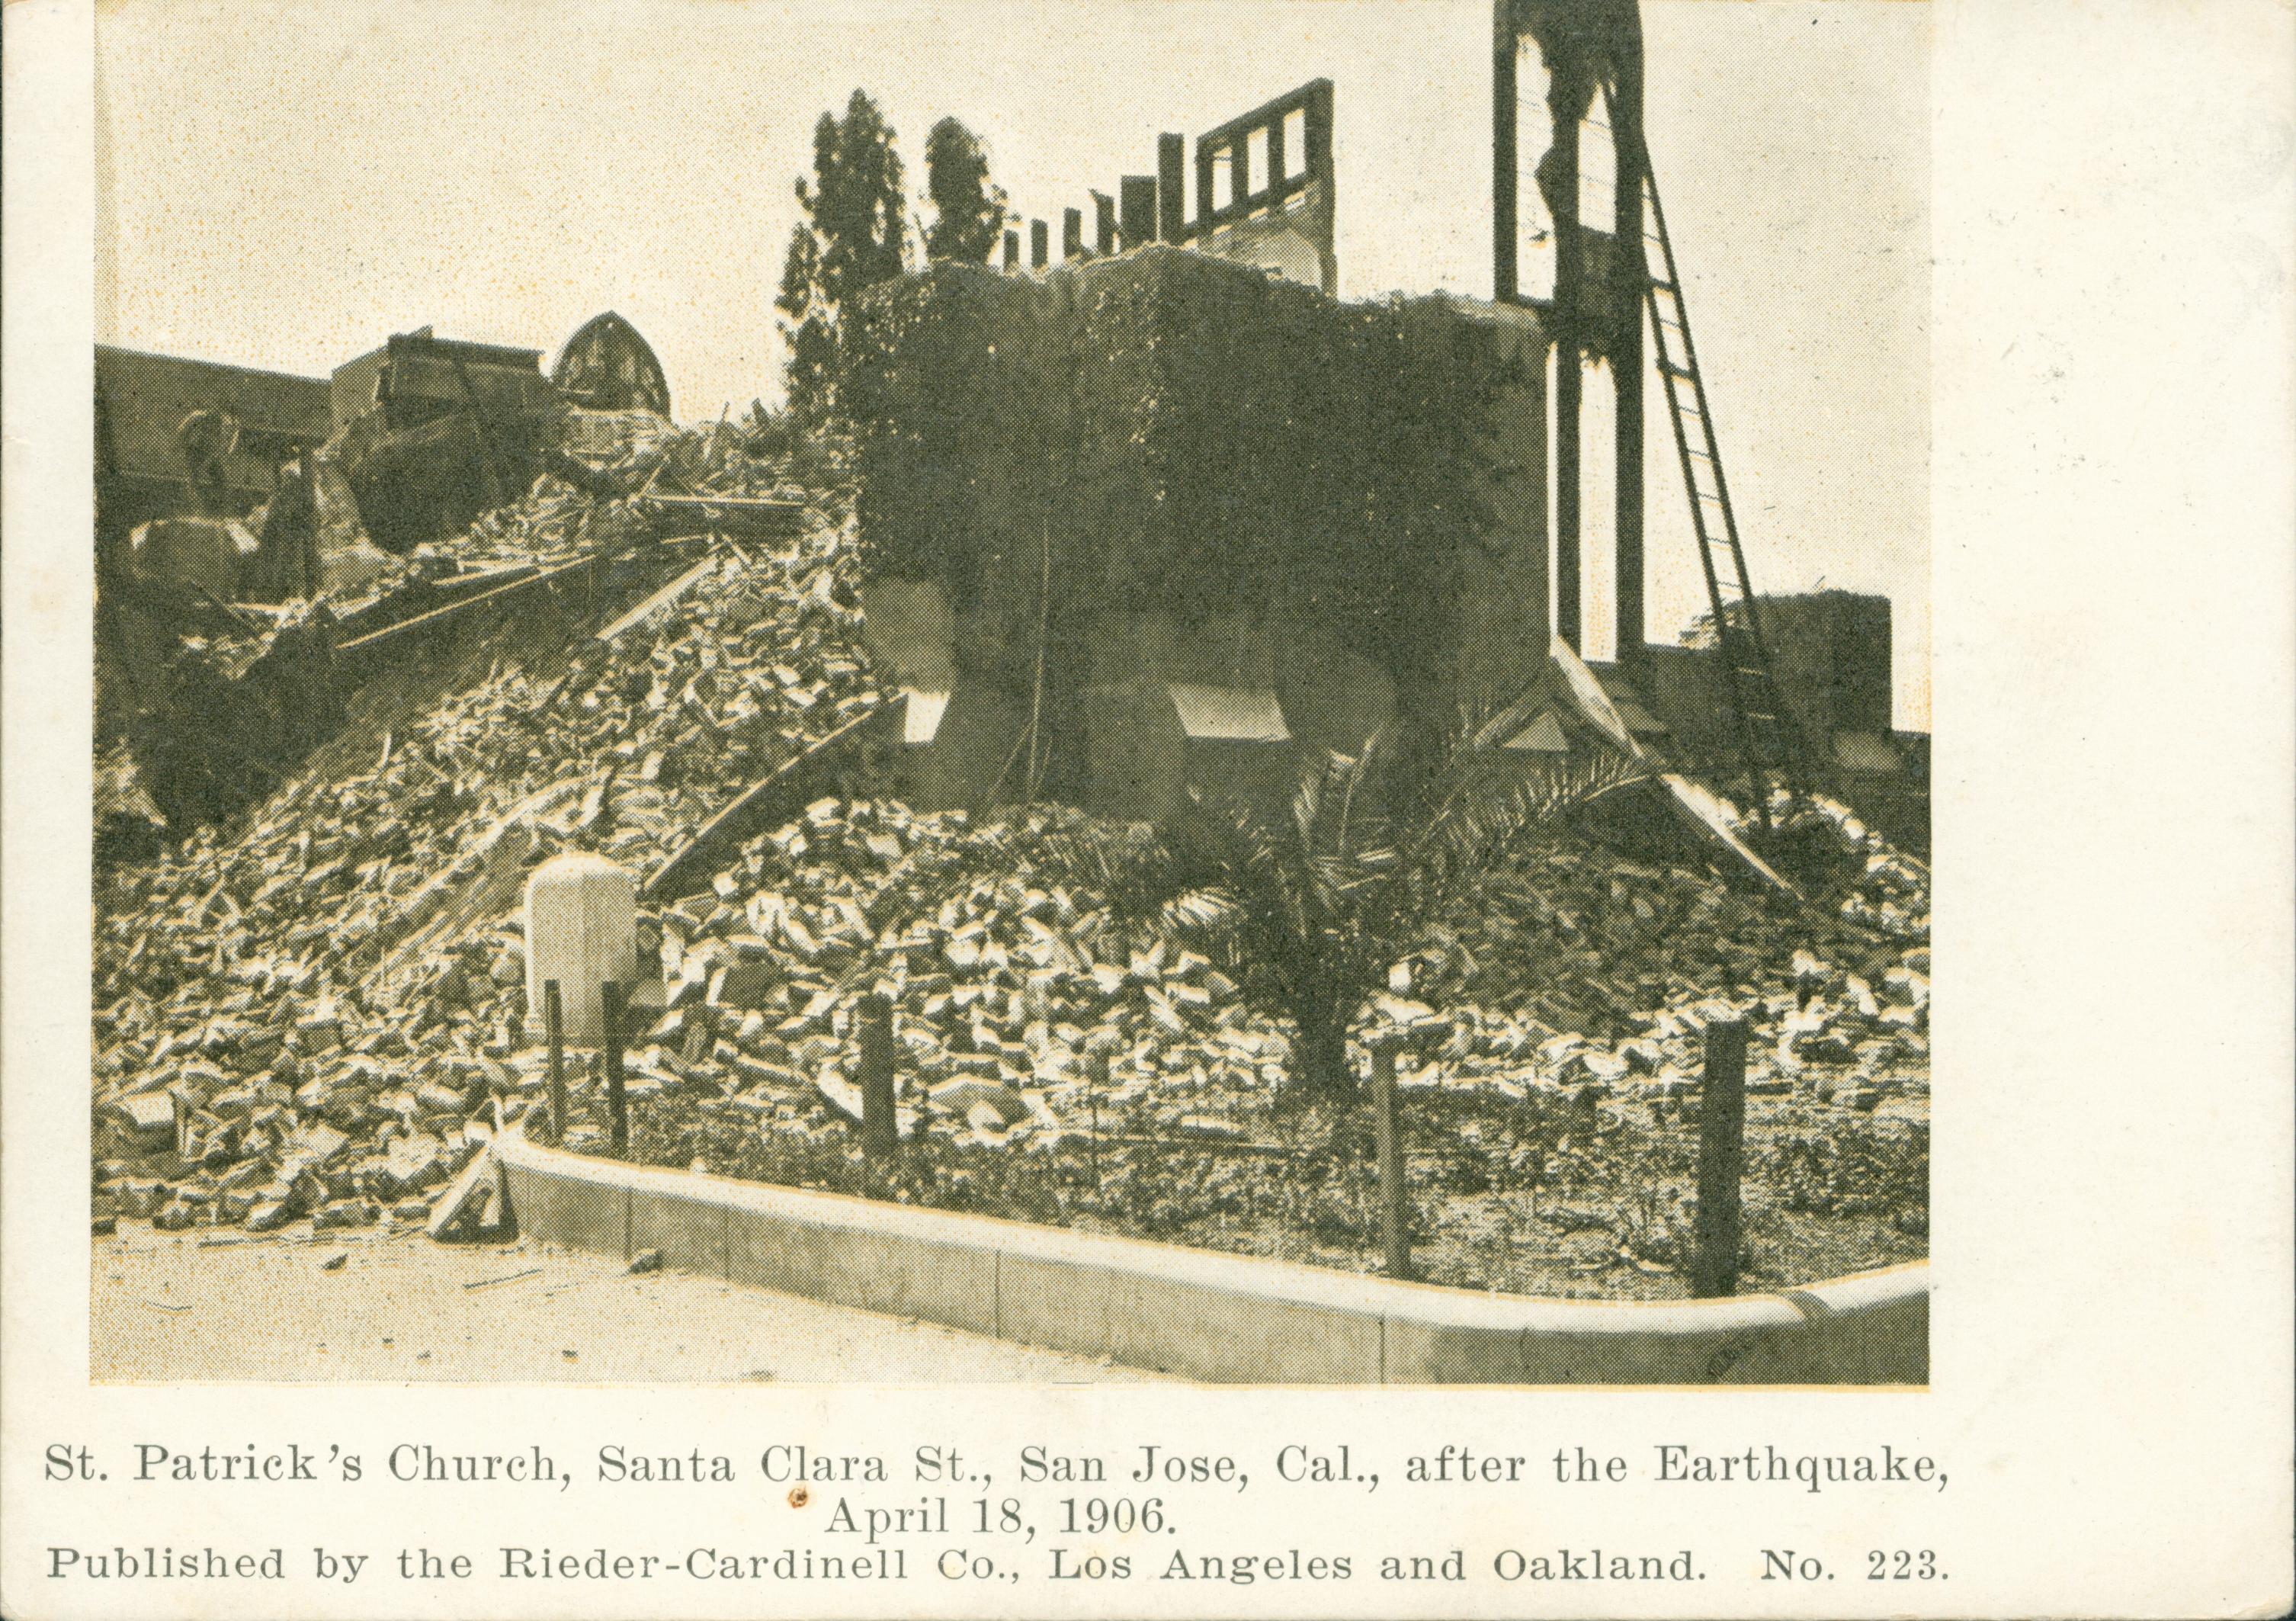 St. Patrick's Church after the Earthquake, April 18, 1906